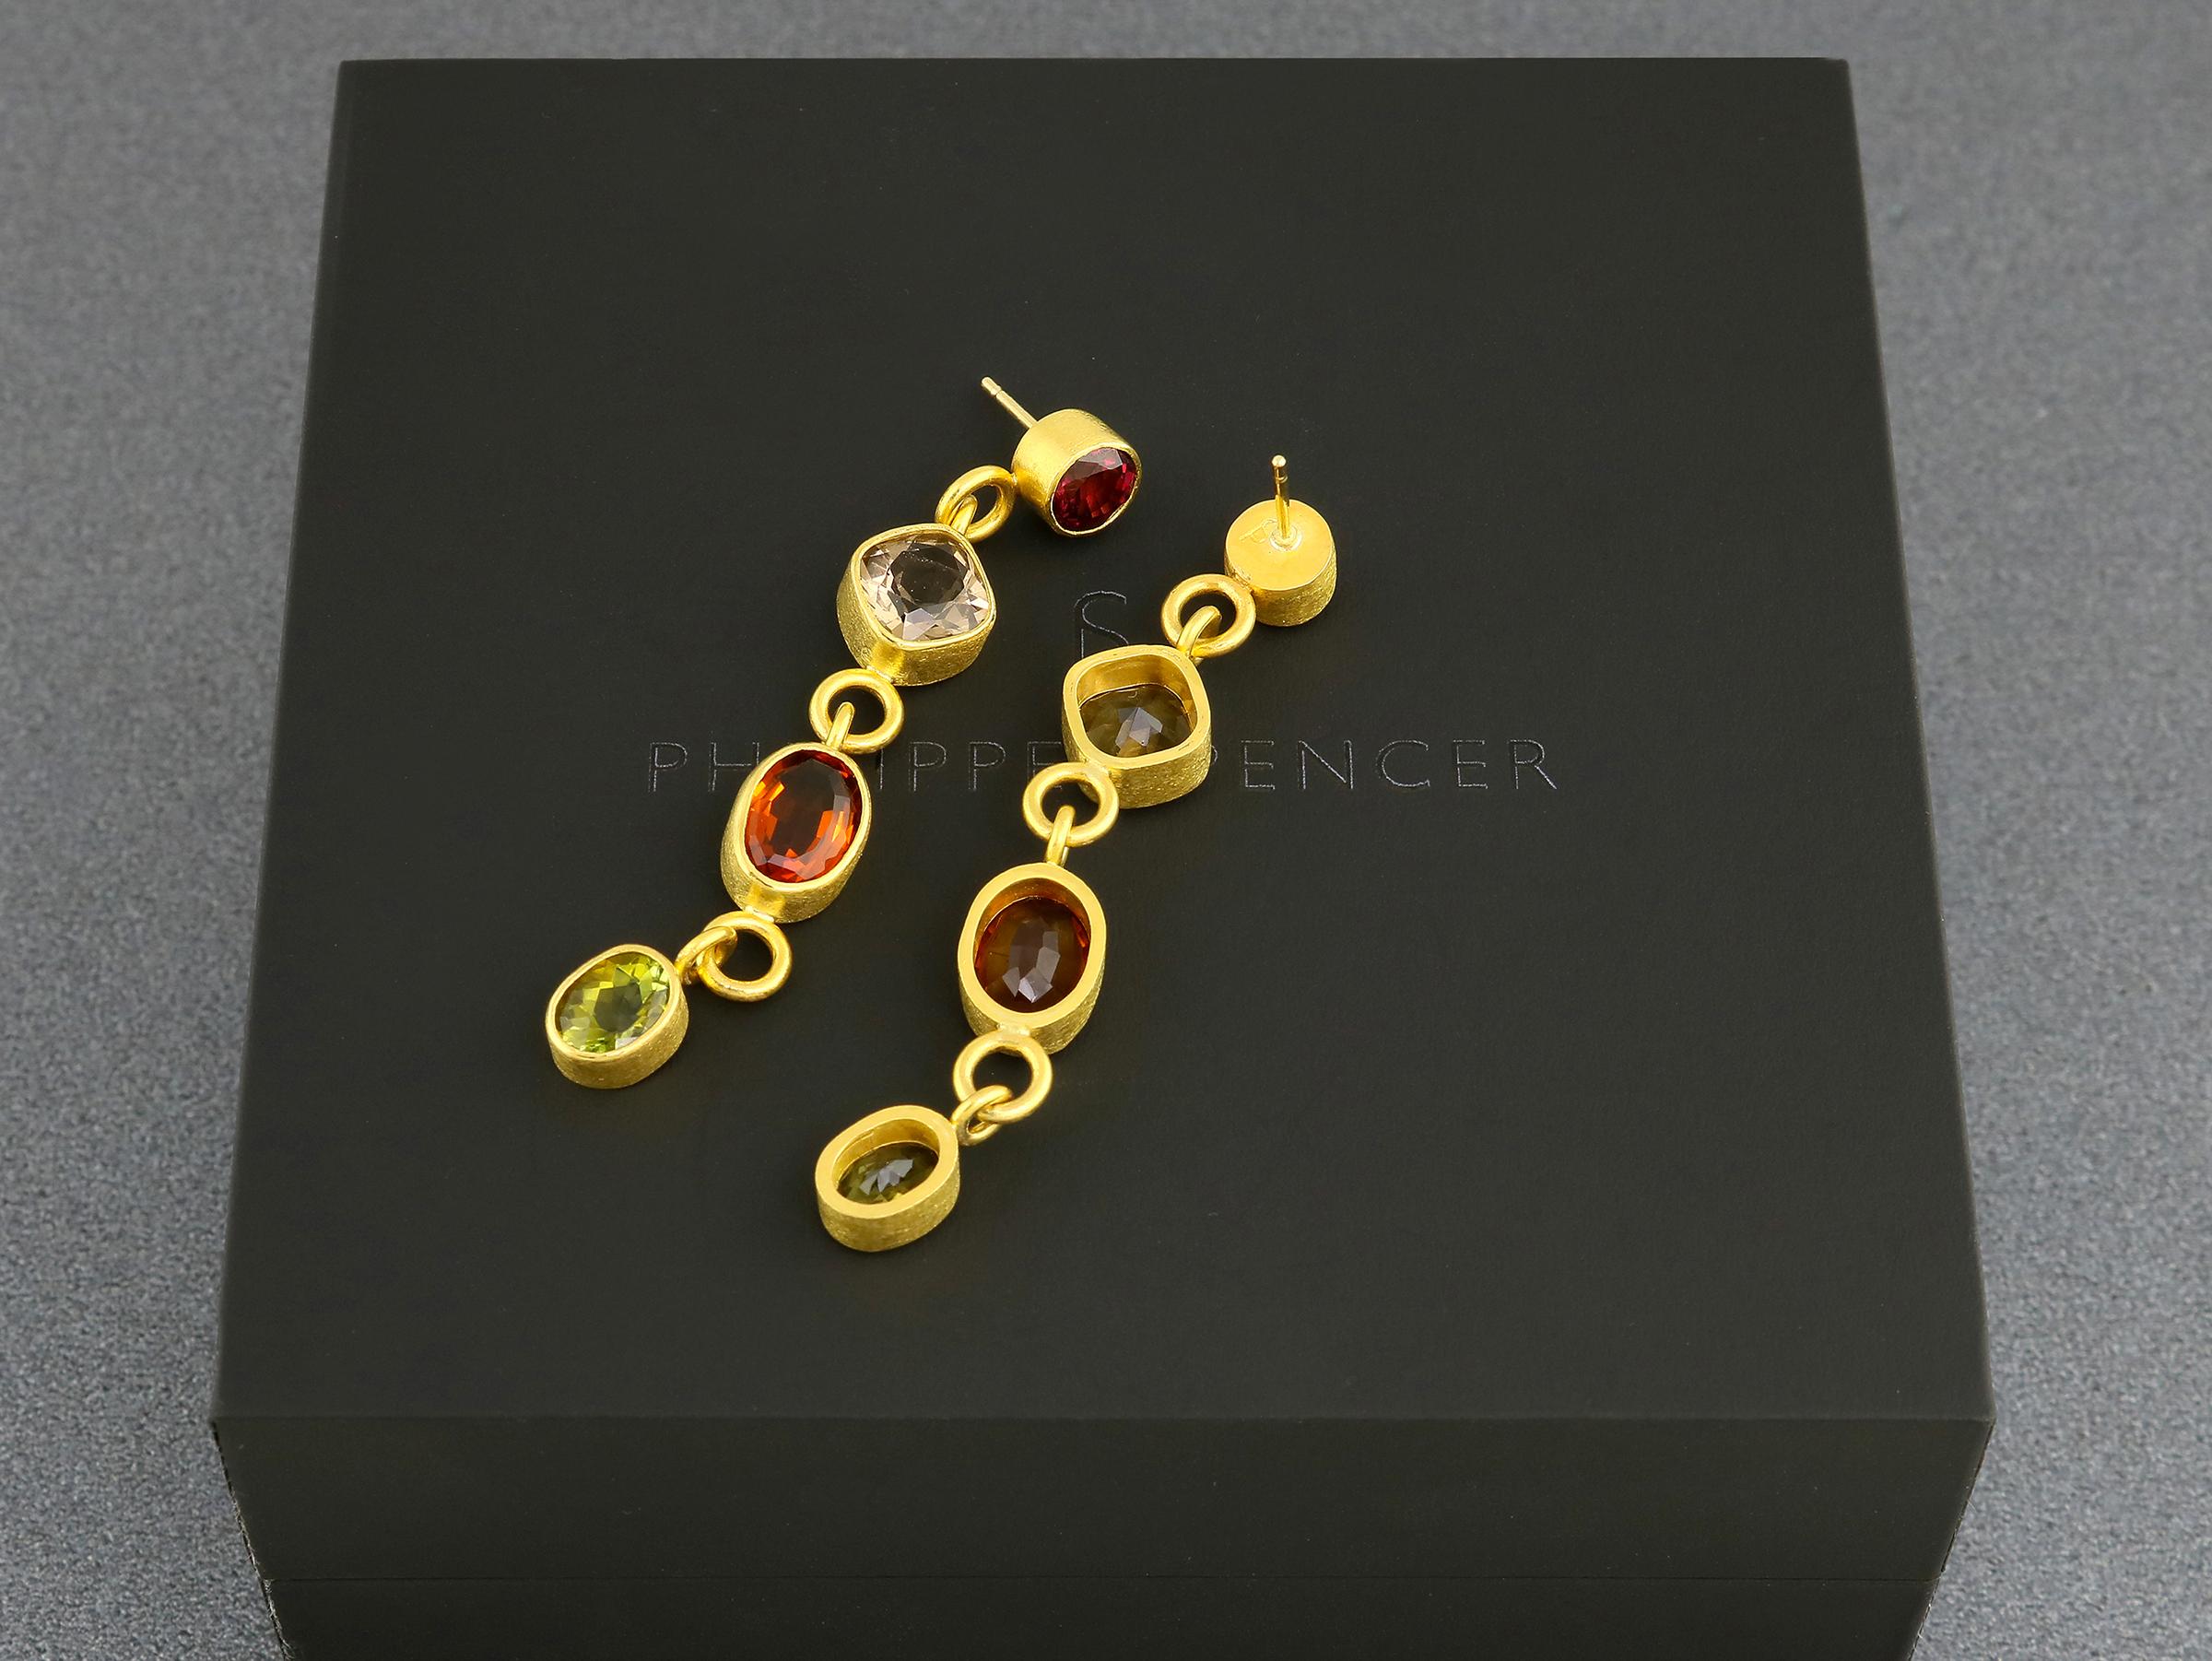 PHILIPPE SPENCER - Pure 22K Gold Mixed-Gem One-Of-A-Kind Dangling Statement Earrings. (2) Round Garnets (2.8 Ct. Total), (2) Square Fume Quartz (4.3 Ct. Total),  (2) Oval Orange Citrines (4.6 Ct. Total), (2) Oval Green Tourmalines (2.8 Ct. Total),